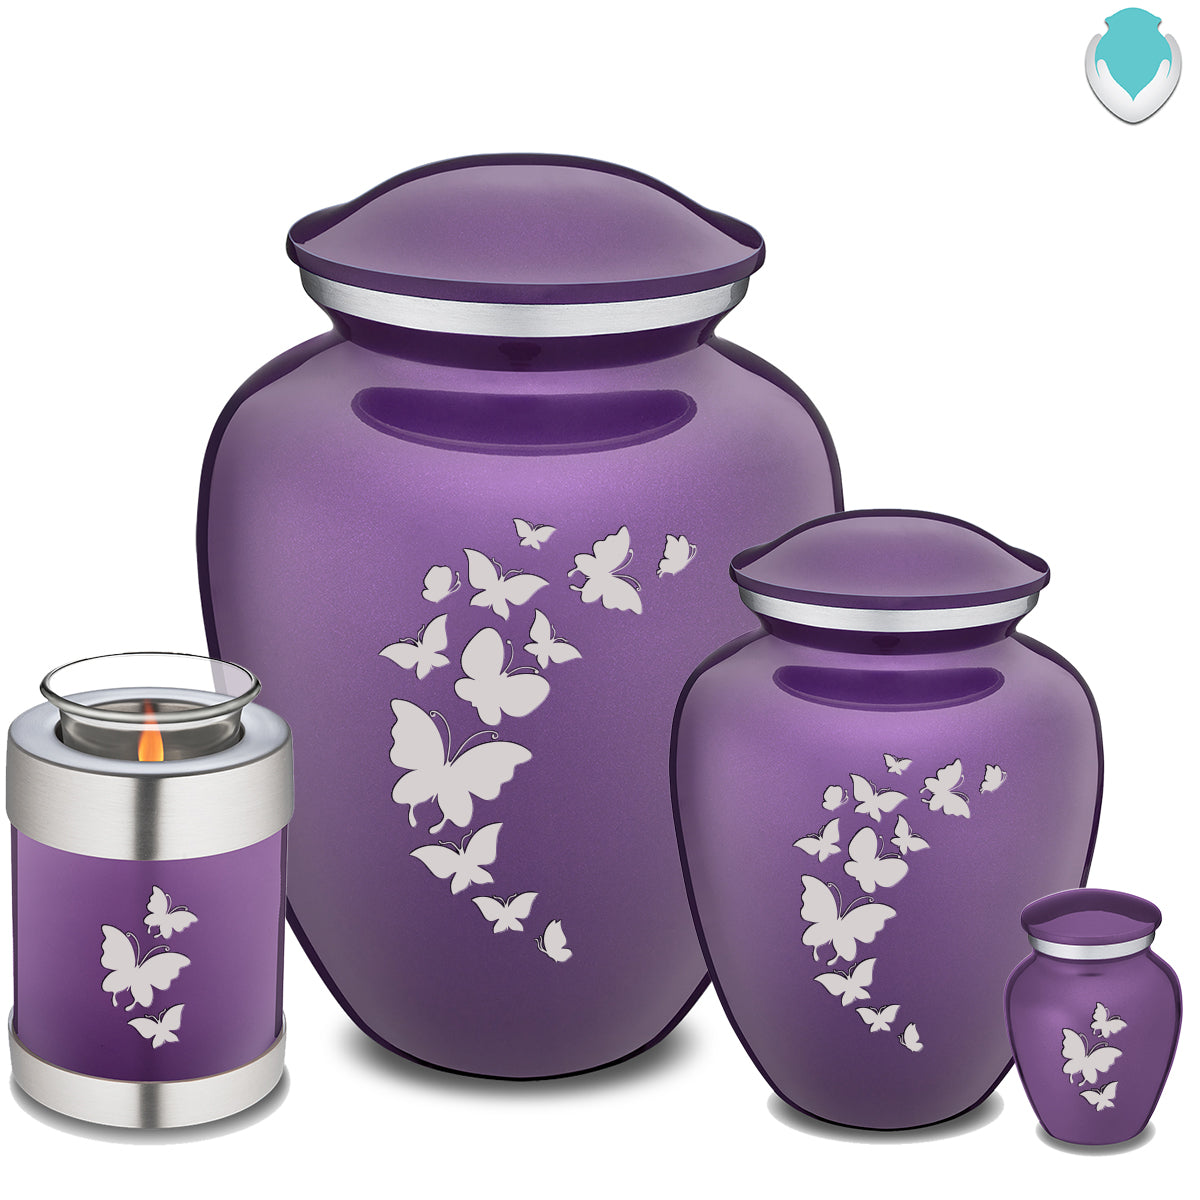 Adult Embrace Purple Butterfly Cremation Urn